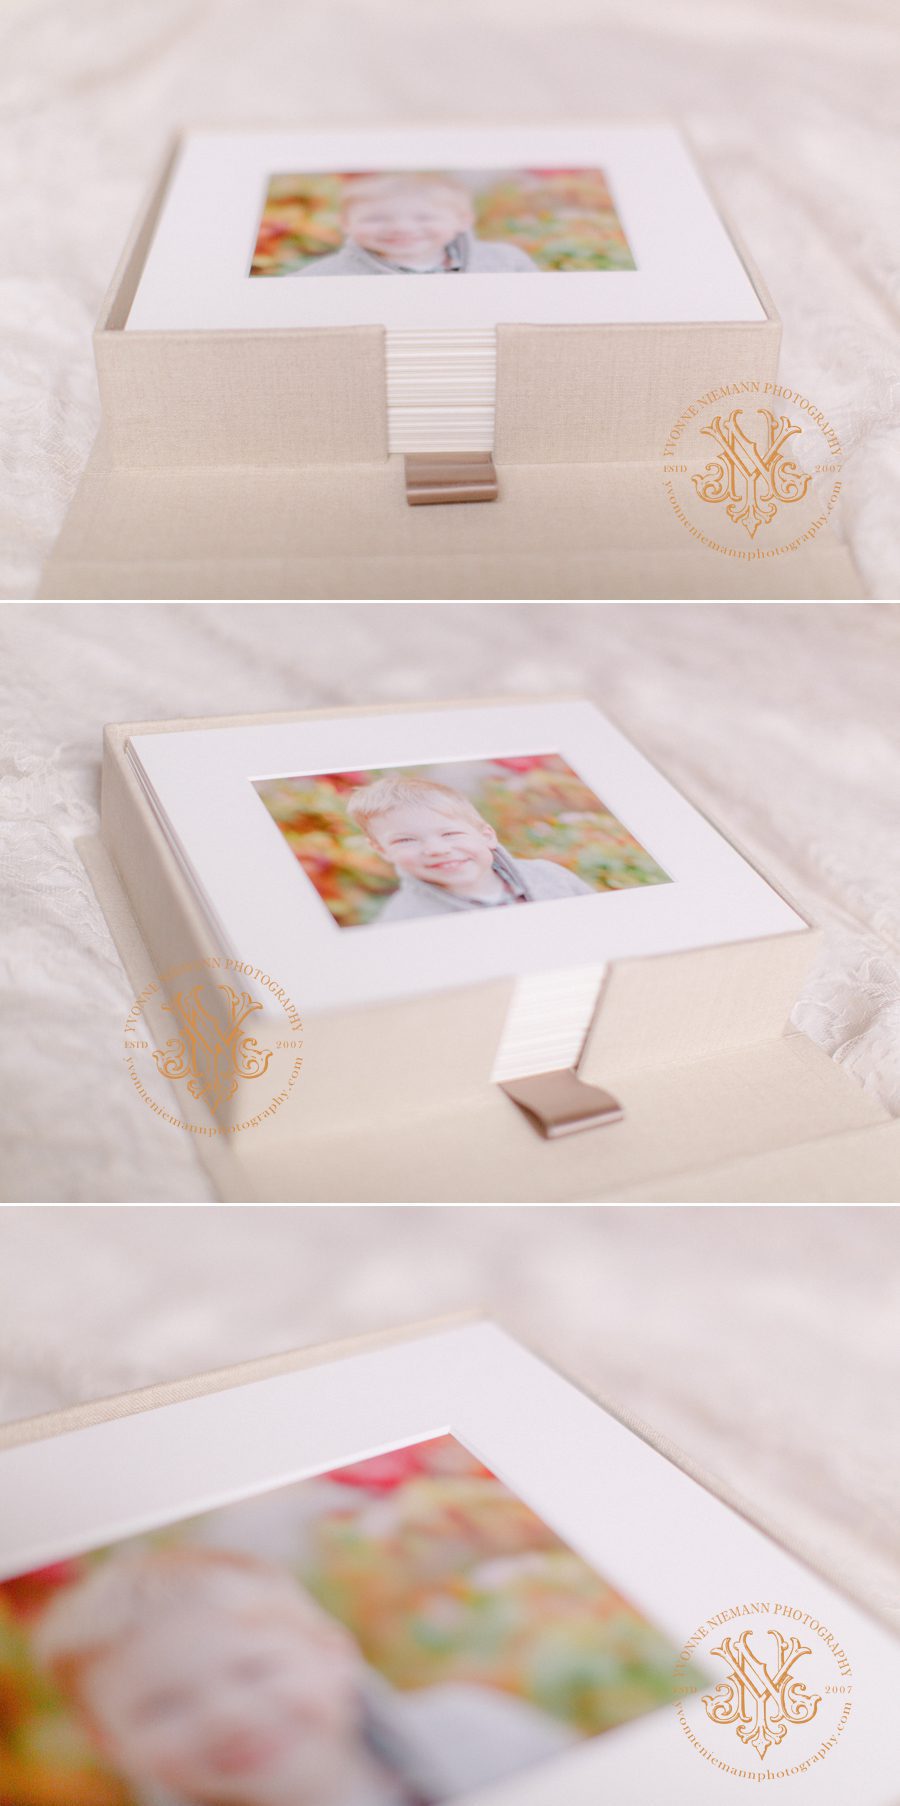 Matted children's photos in image box offered by Athens, GA child photographer, Yvonne Niemann.